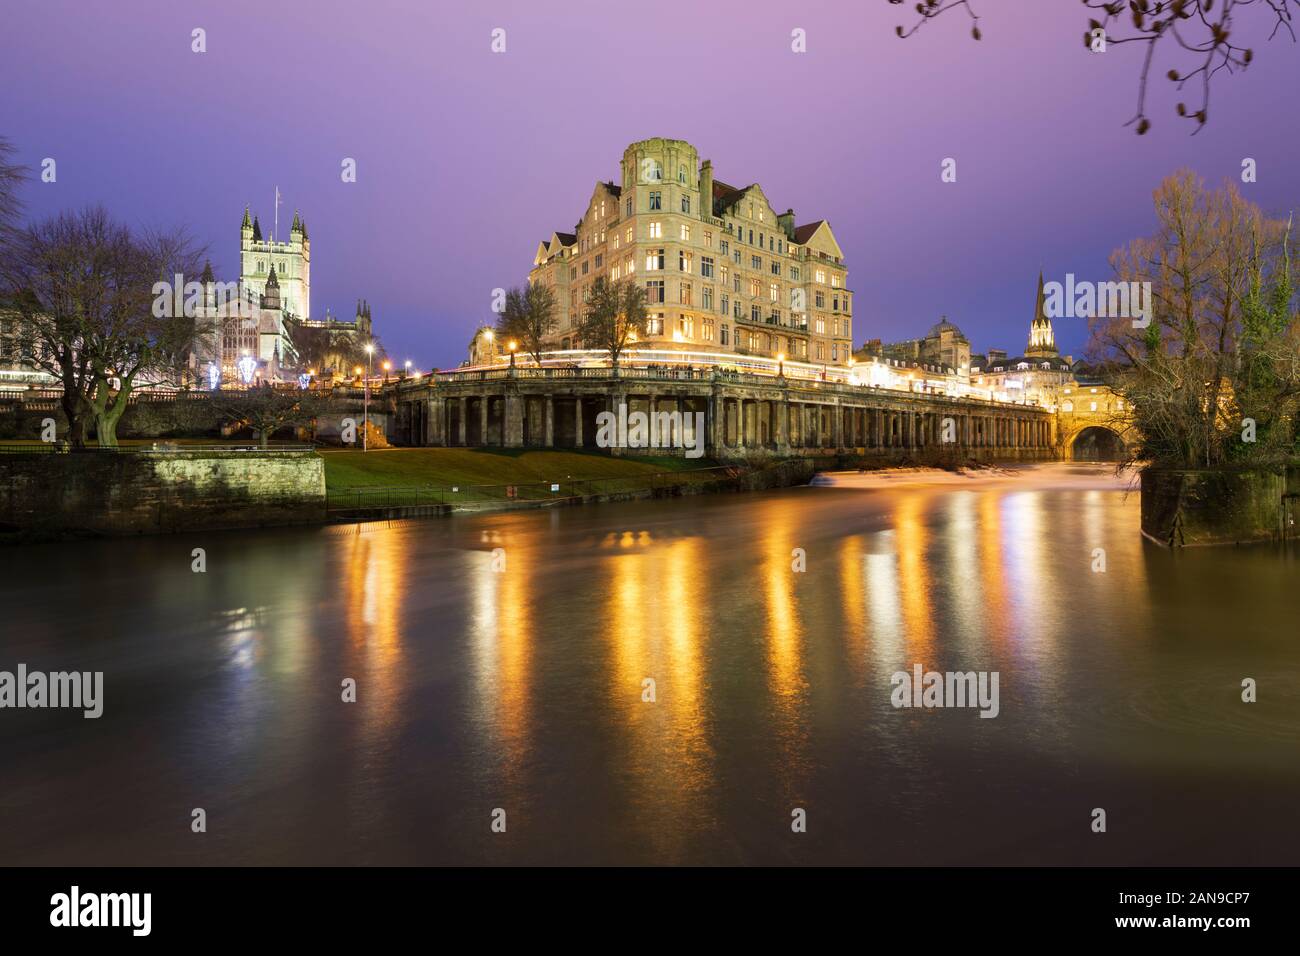 View across the River Avon to The Empire Hotel and Bath Abbey floodlit at dusk, Bath, Somerset, England, United Kingdom, Europe Stock Photo